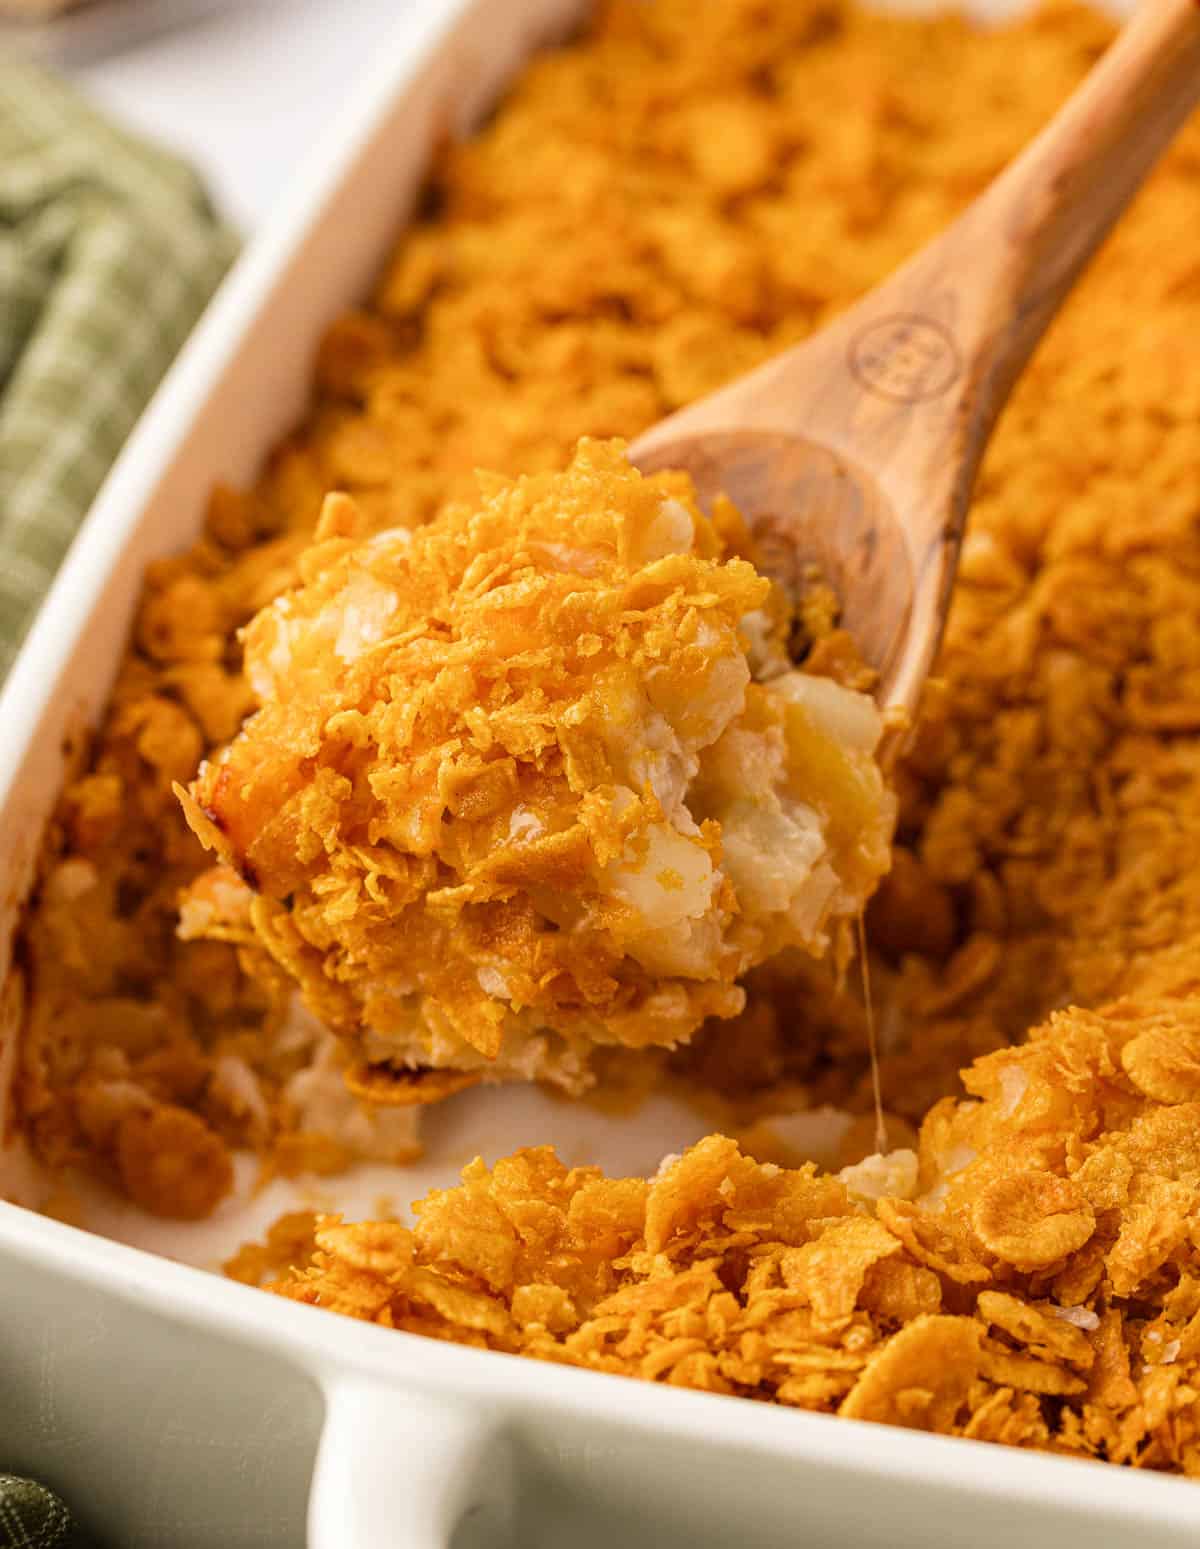 taking a scoop of funeral potatoes from the baking dish